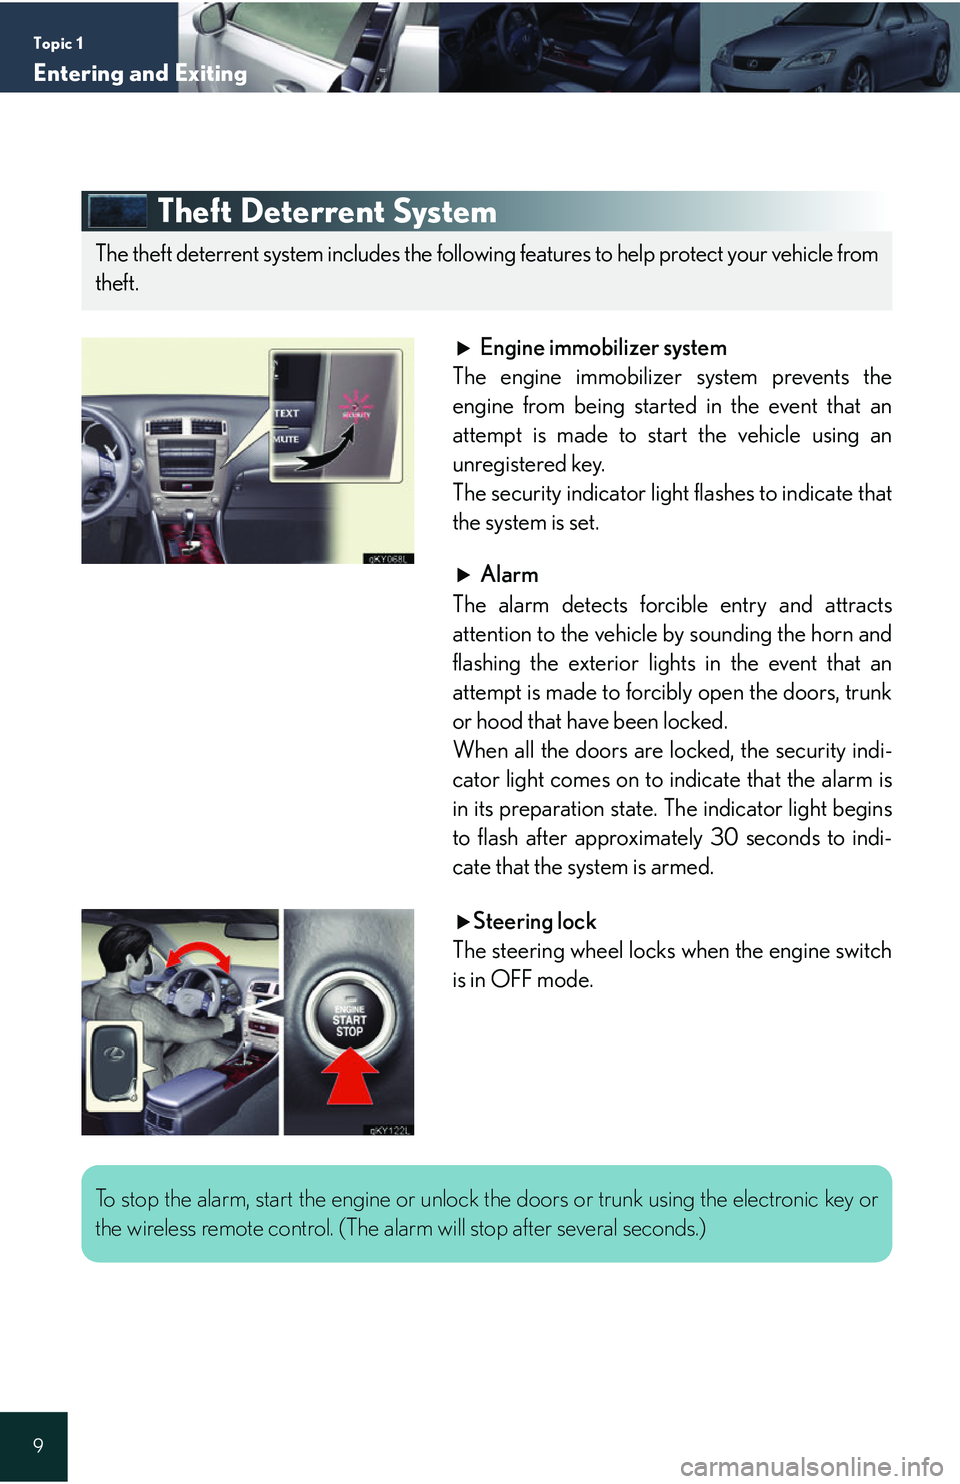 Lexus IS250 2006  Audio/video System / LEXUS 2006 IS350/250 QUICK REFERENCE GUIDE Topic 1
Entering and Exiting
9
Theft Deterrent System
Engine immobilizer system
The engine immobilizer system prevents the
engine from being started in the event that an
attempt is made to start the v